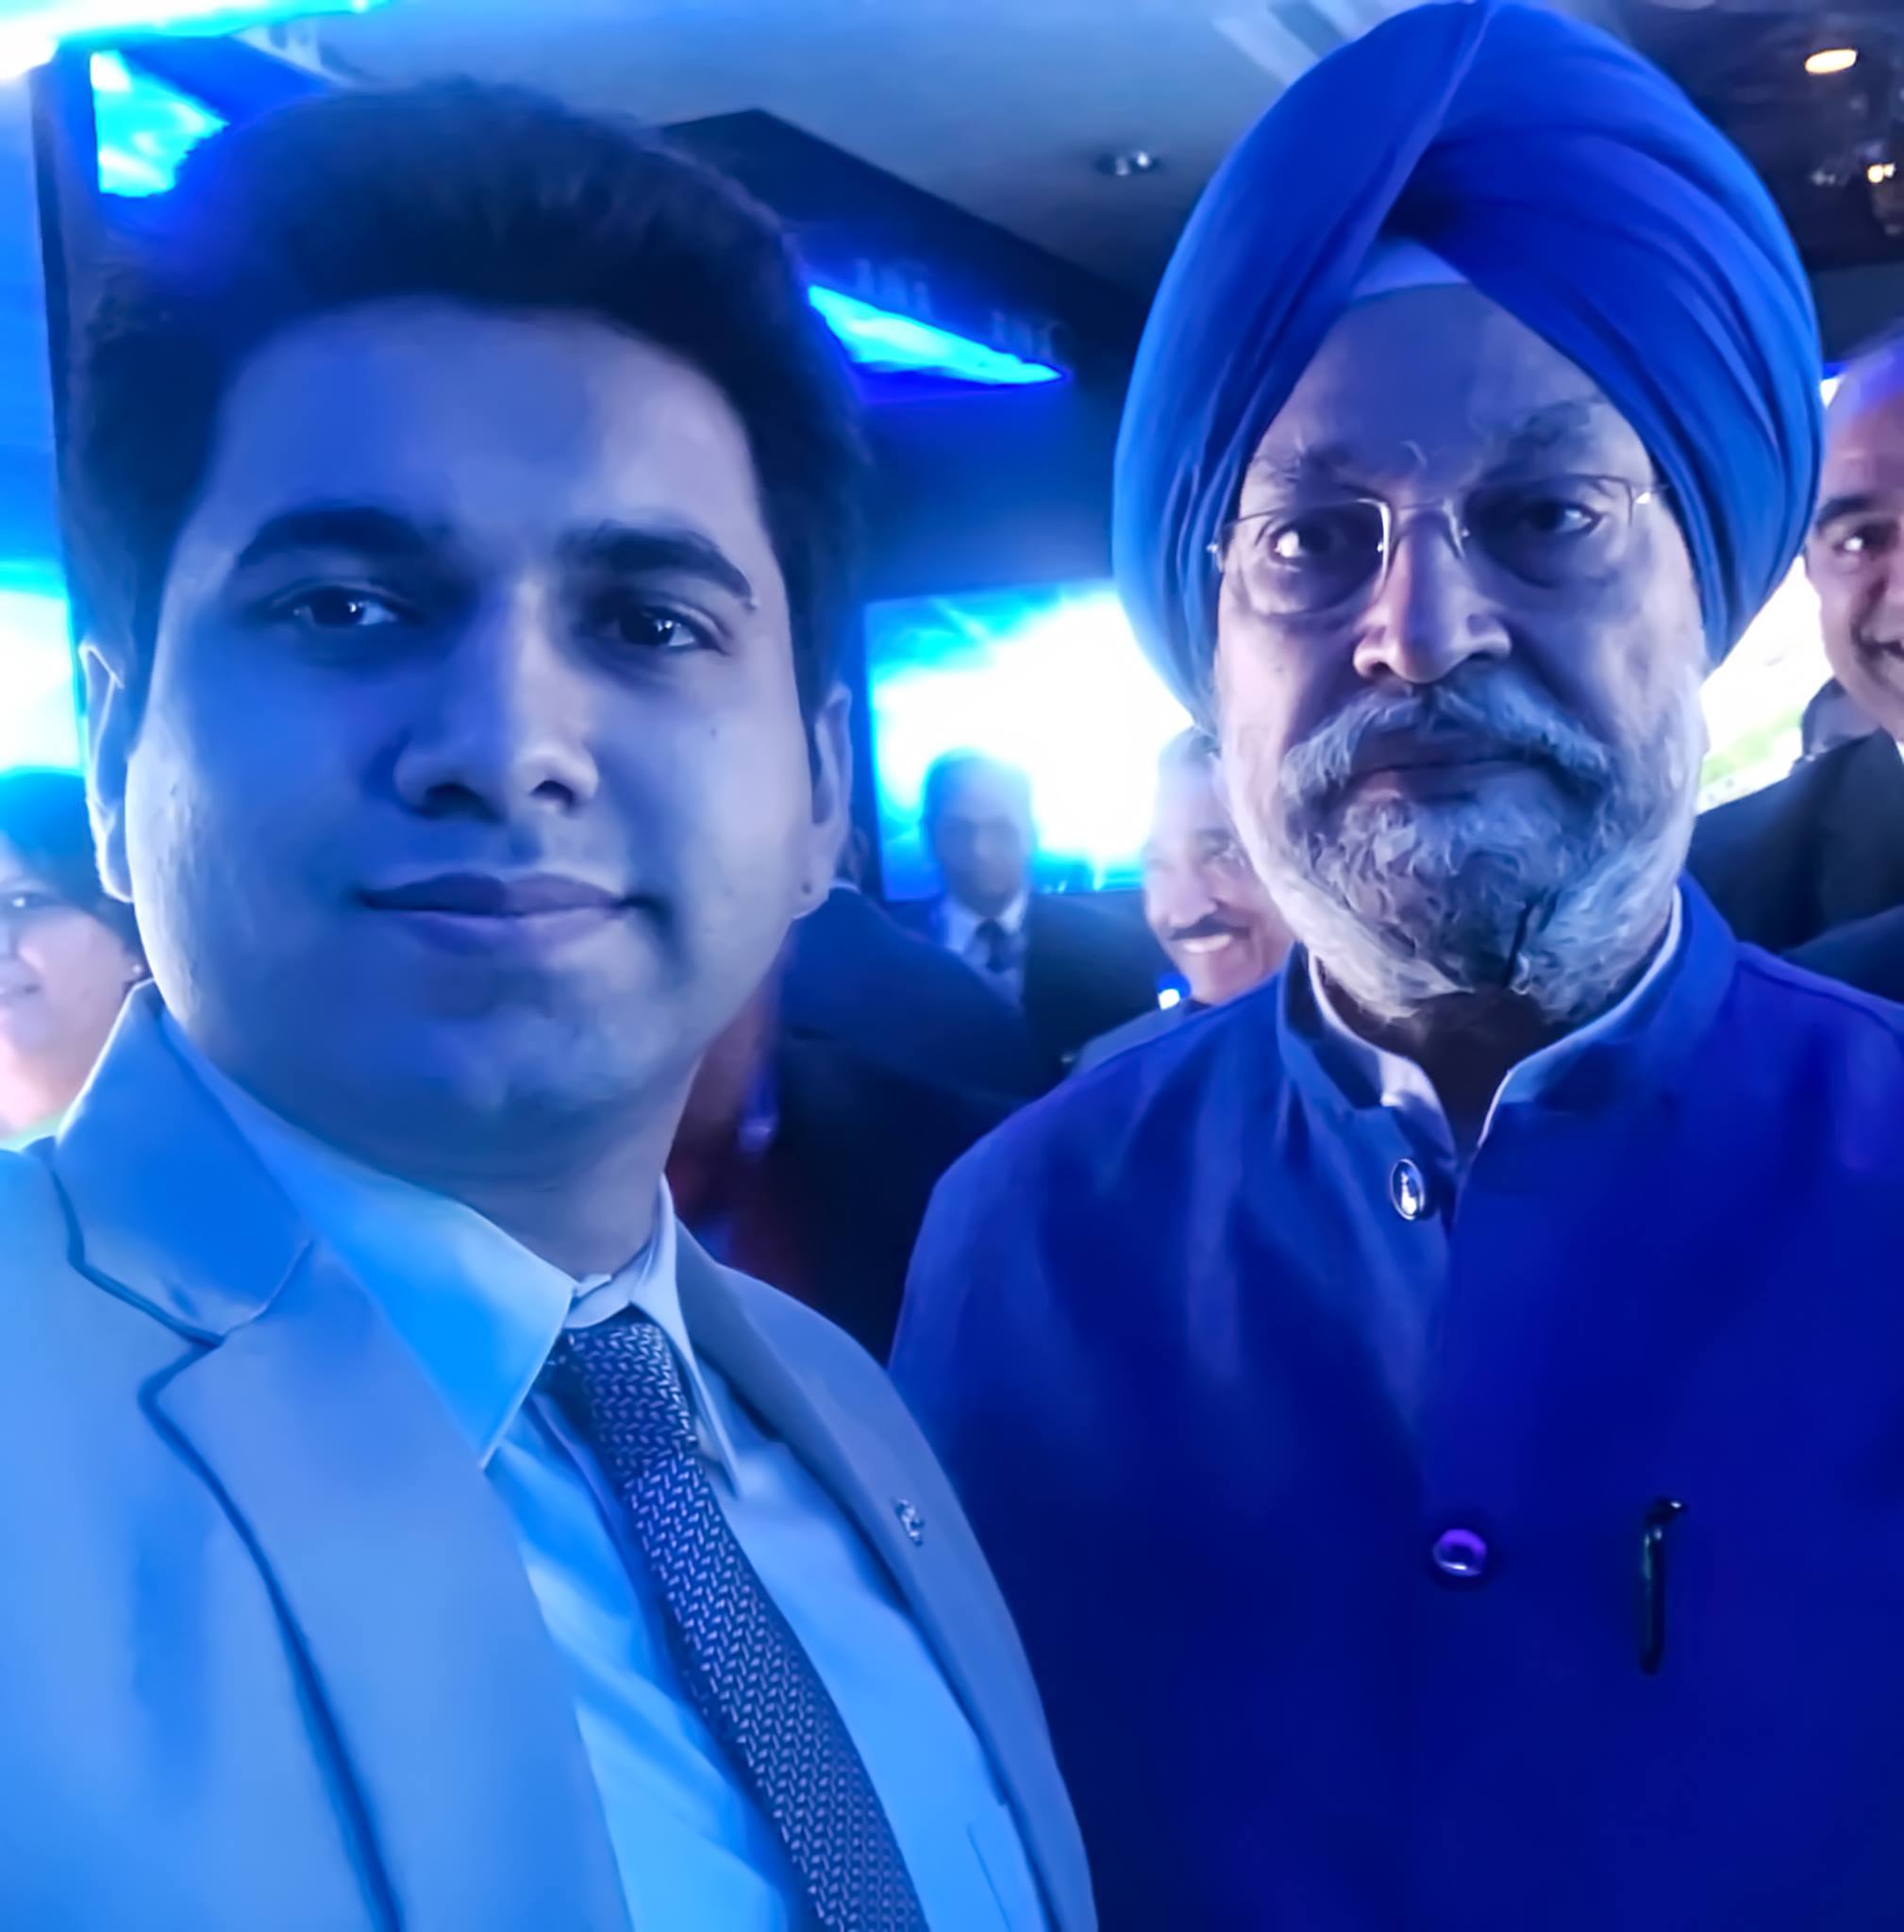 Hon’ble Hardeep Singh Puri Petroleum and Natural Gas Minister of India